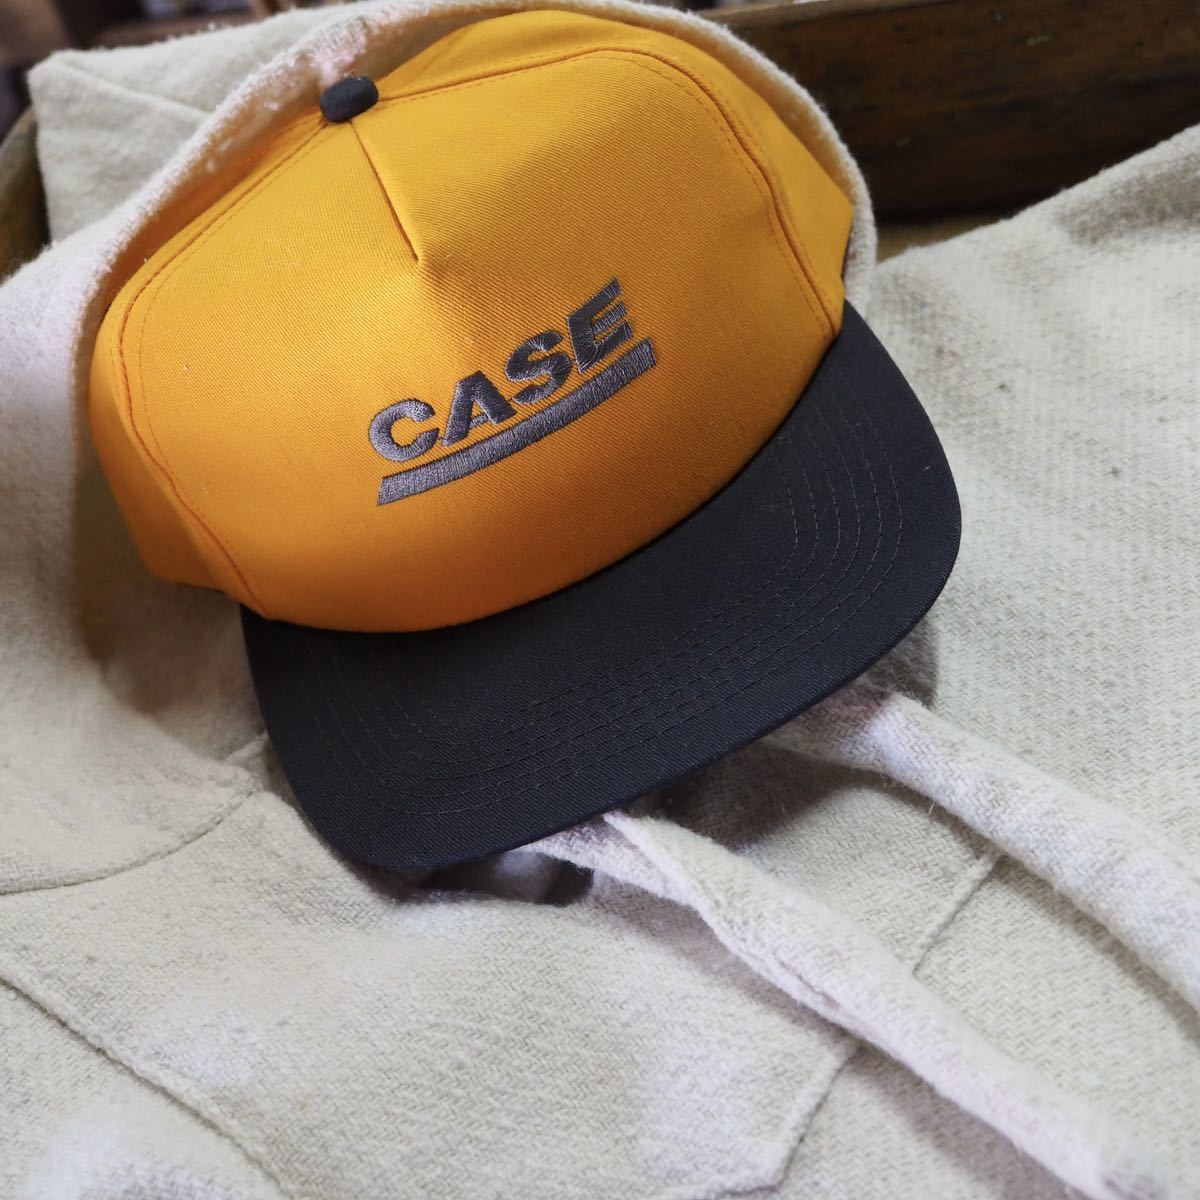 【NOS】80's CASE trucker hat one size fits all USA製 /K product スナップバックキャップ 帽子 ビンテージ デッドストック企業ロゴ_画像1